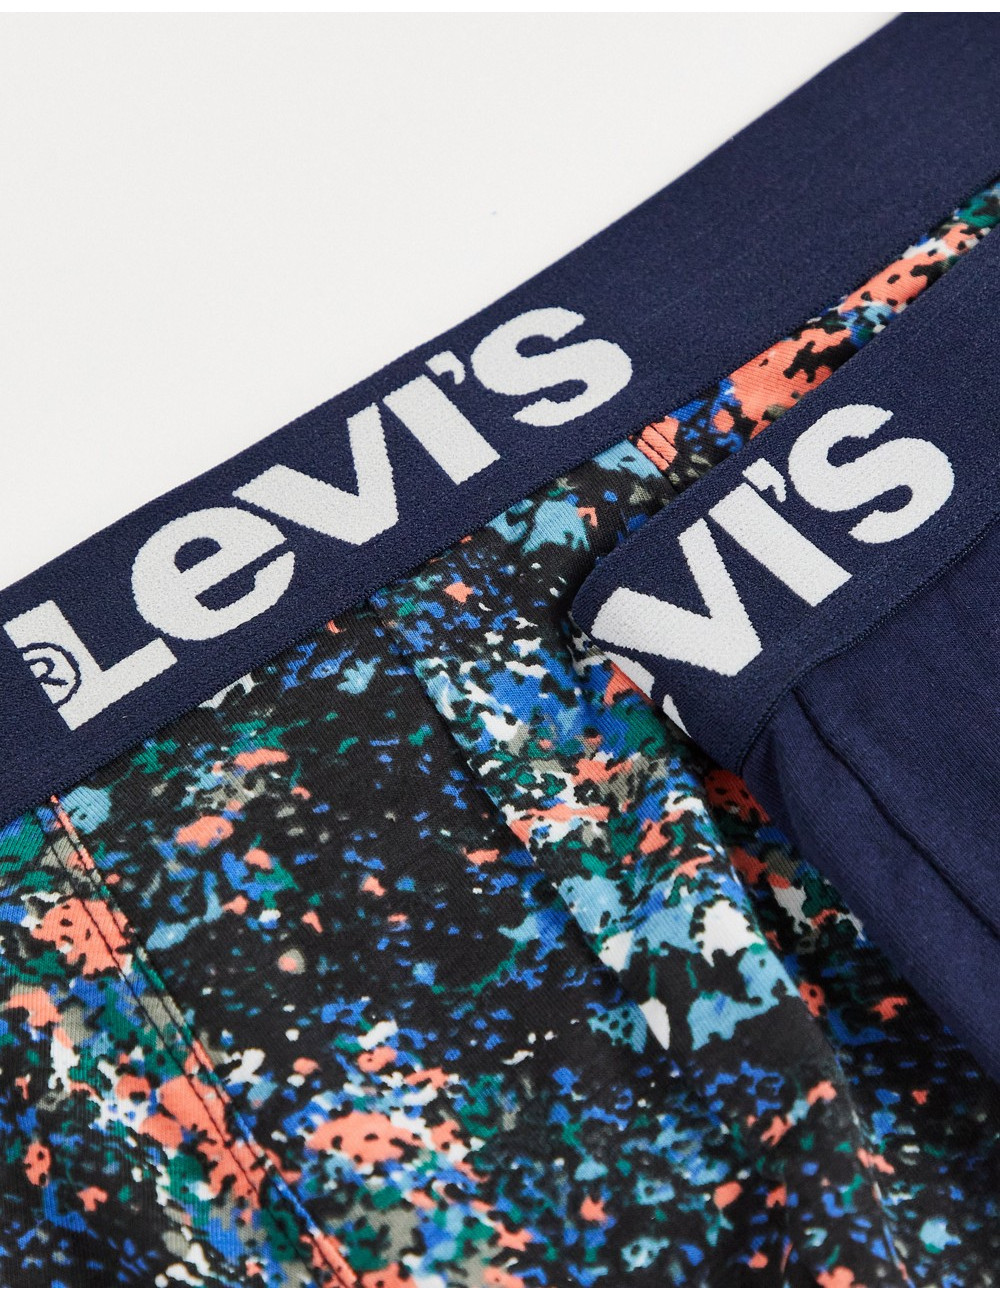 Levi's 2 pack Spacey Flower...